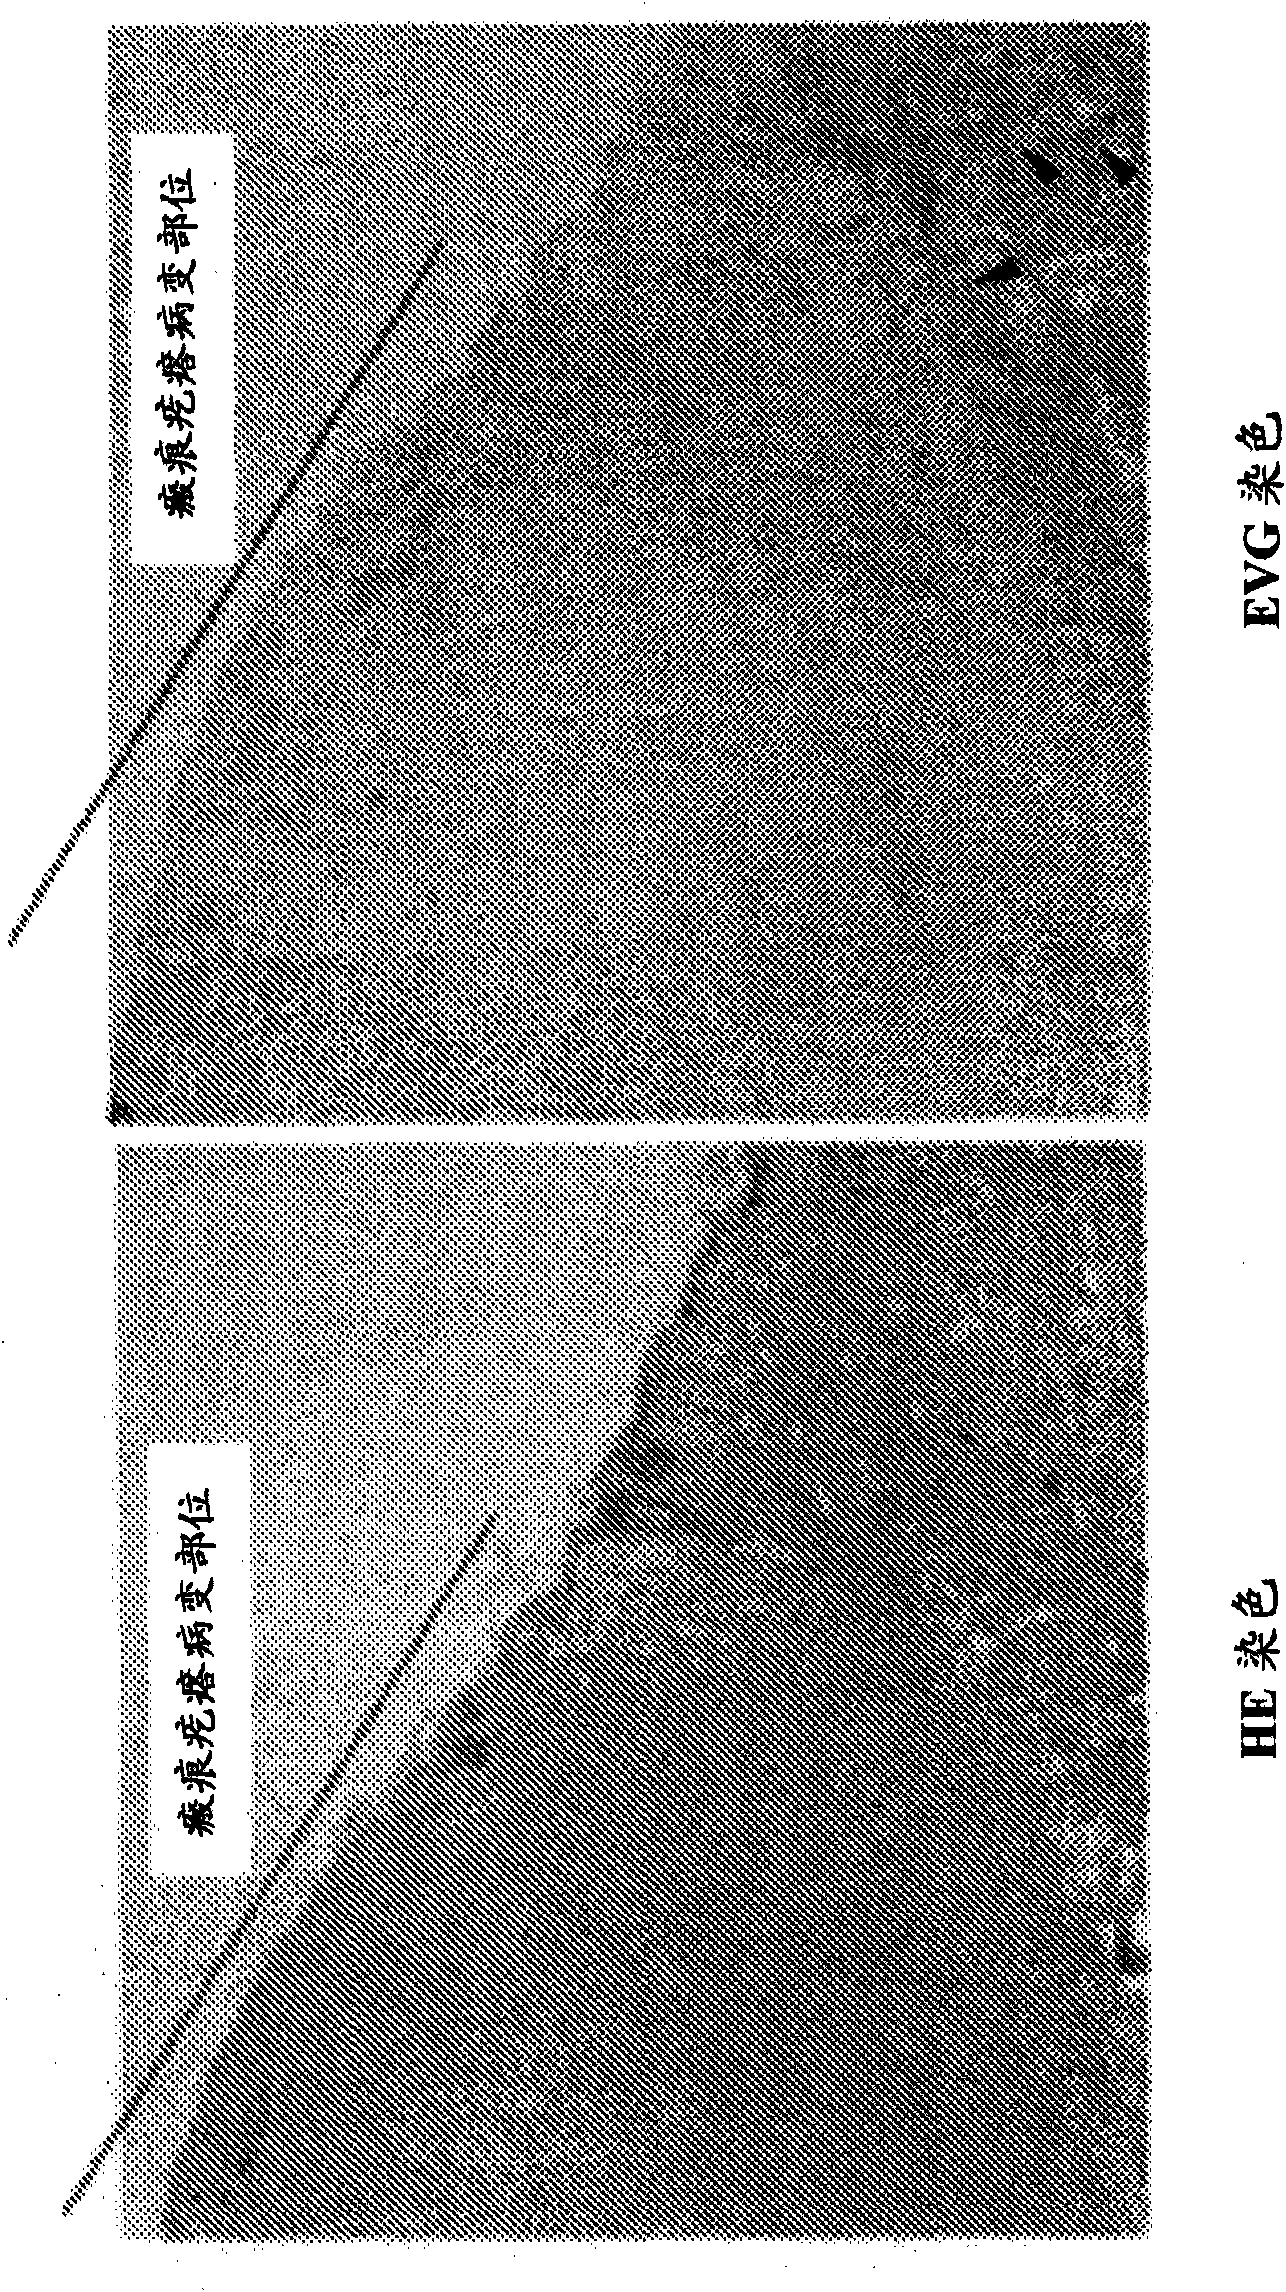 Radical therapeutic agent for keloid and hypertrophic scar